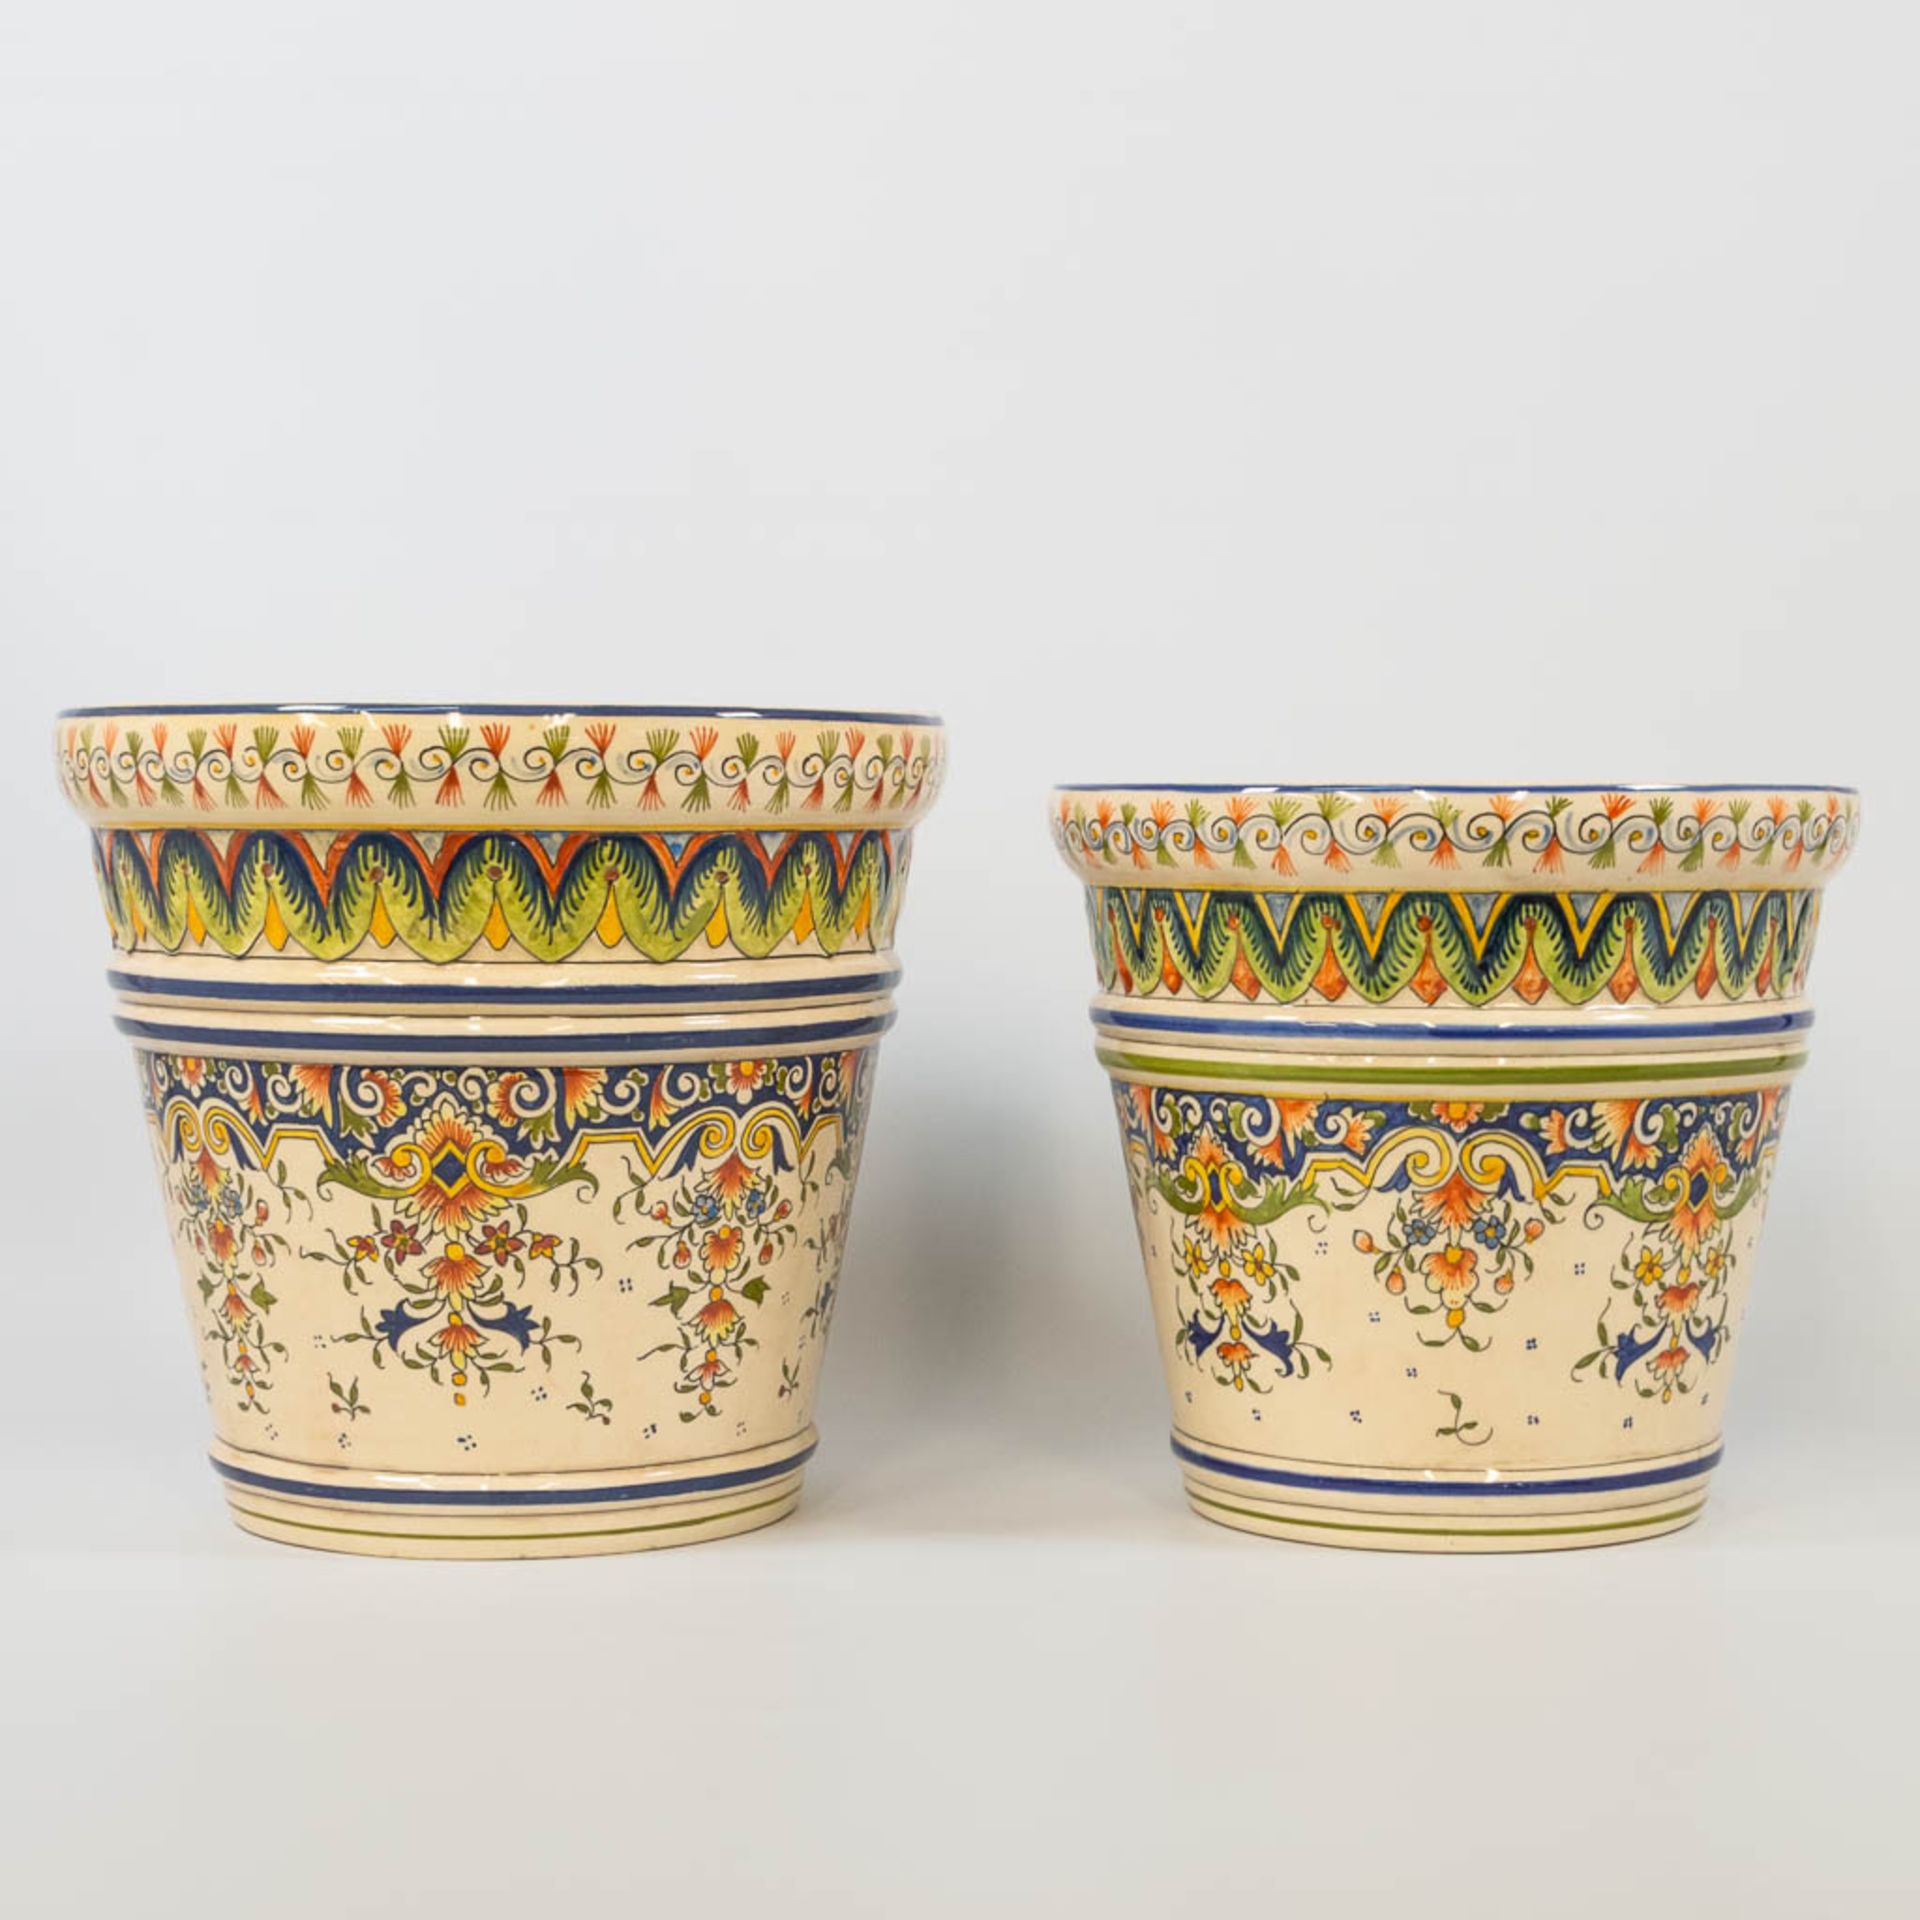 A collection of 2 cache-pots in two sizes with hand-painted decor, made of faience in Rouen, France. - Bild 8 aus 12